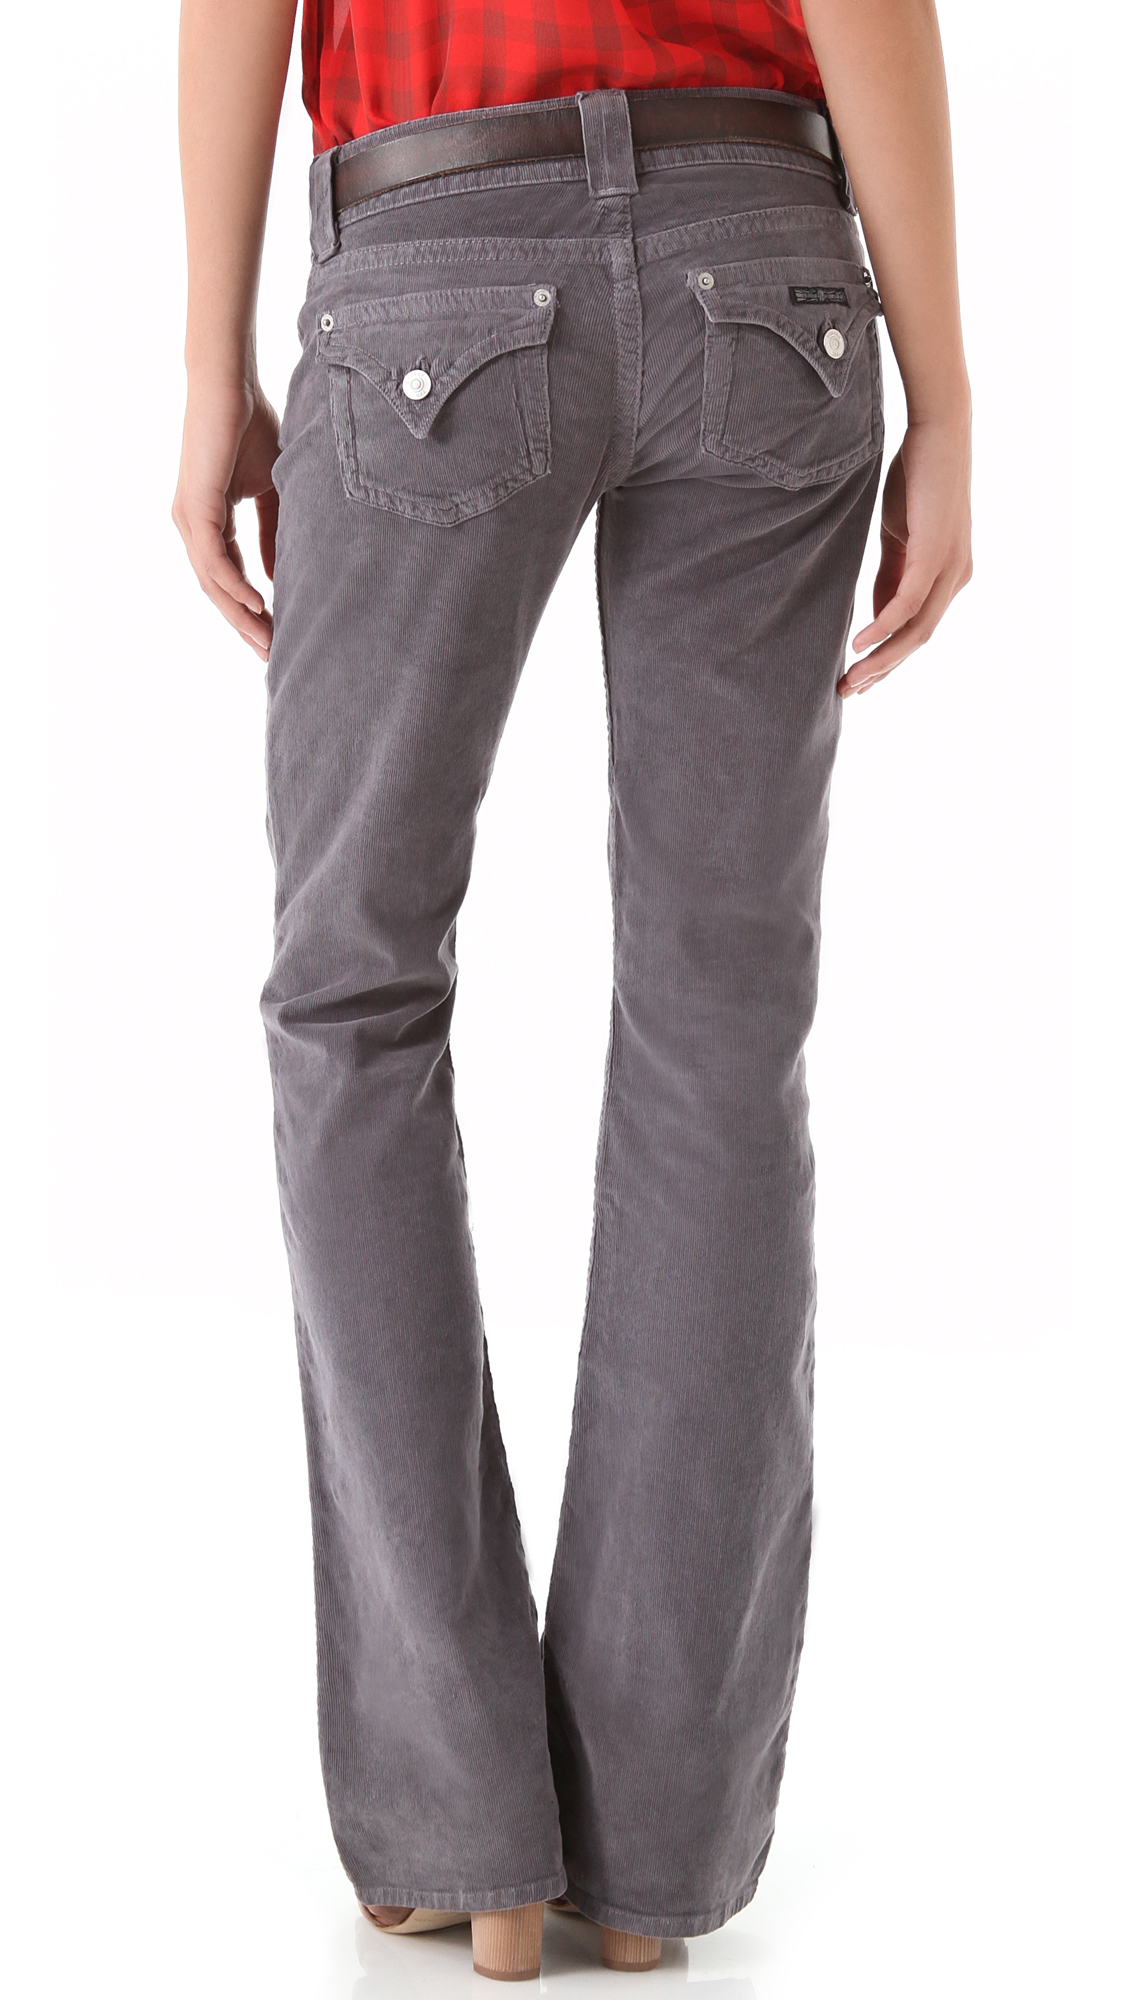 Hudson Jeans Signature Boot Cut Corduroy Pants in Gray - Lyst